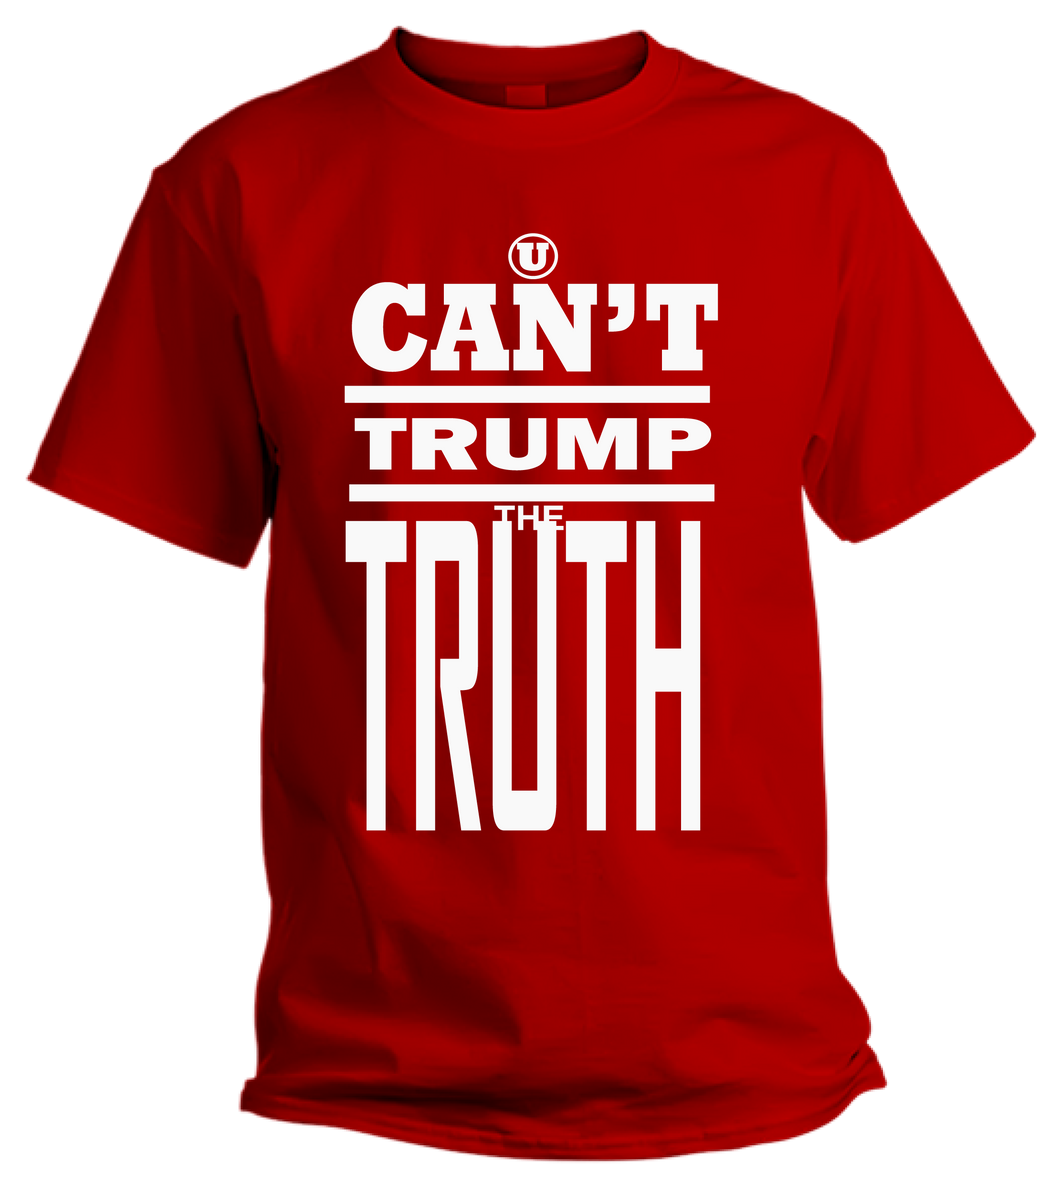 U CAN'T TRUMP THE TRUTH  T-SHIRT (Red)